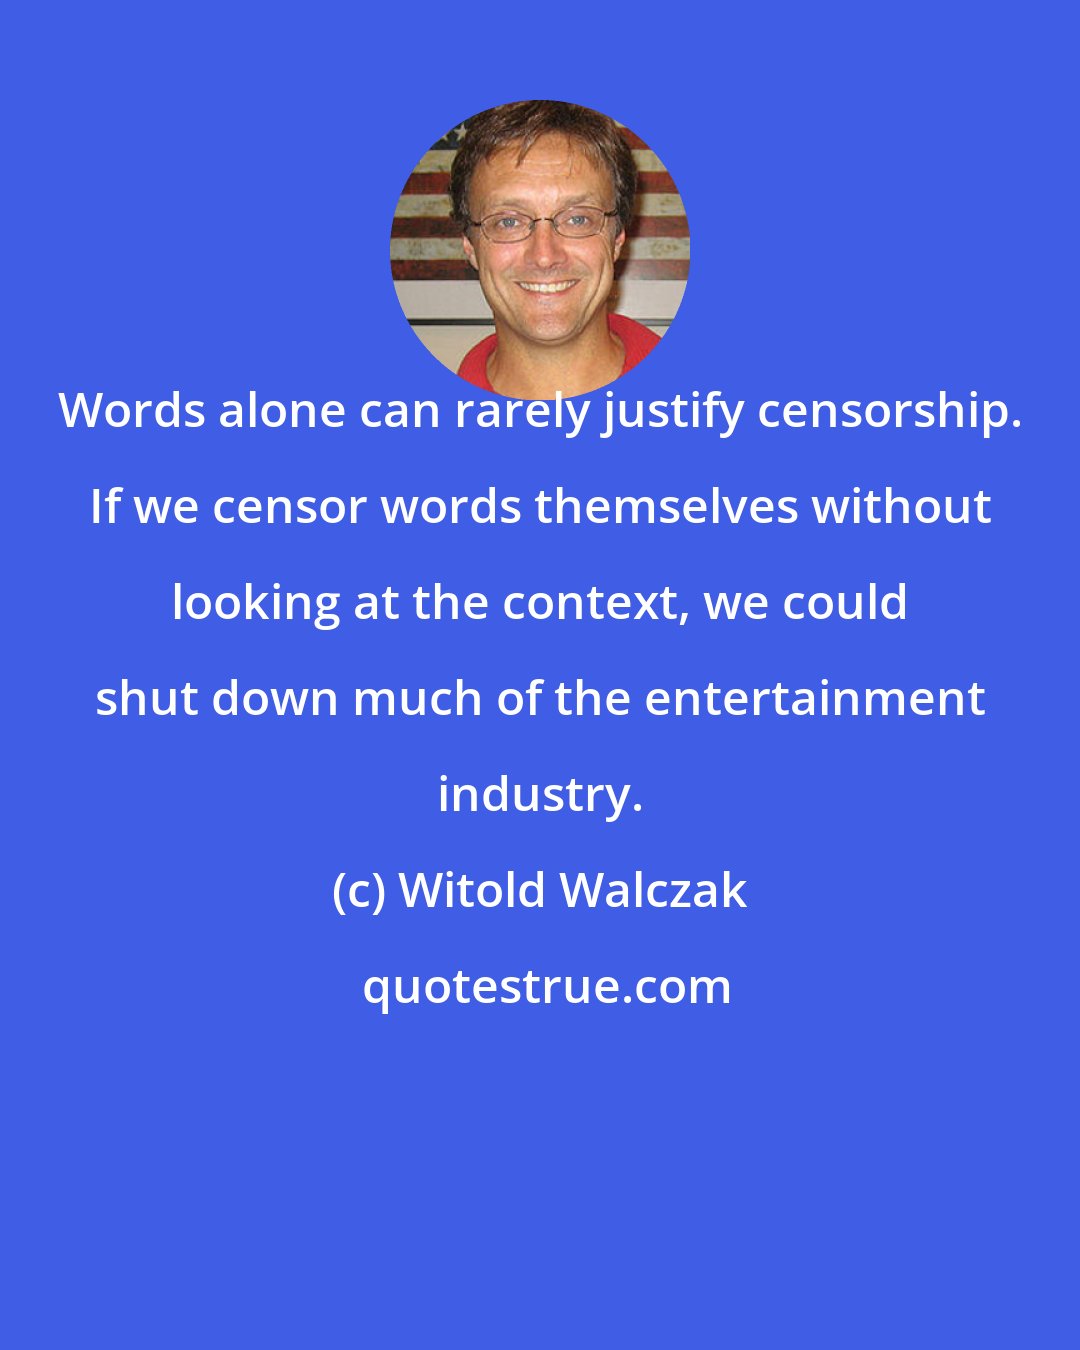 Witold Walczak: Words alone can rarely justify censorship. If we censor words themselves without looking at the context, we could shut down much of the entertainment industry.